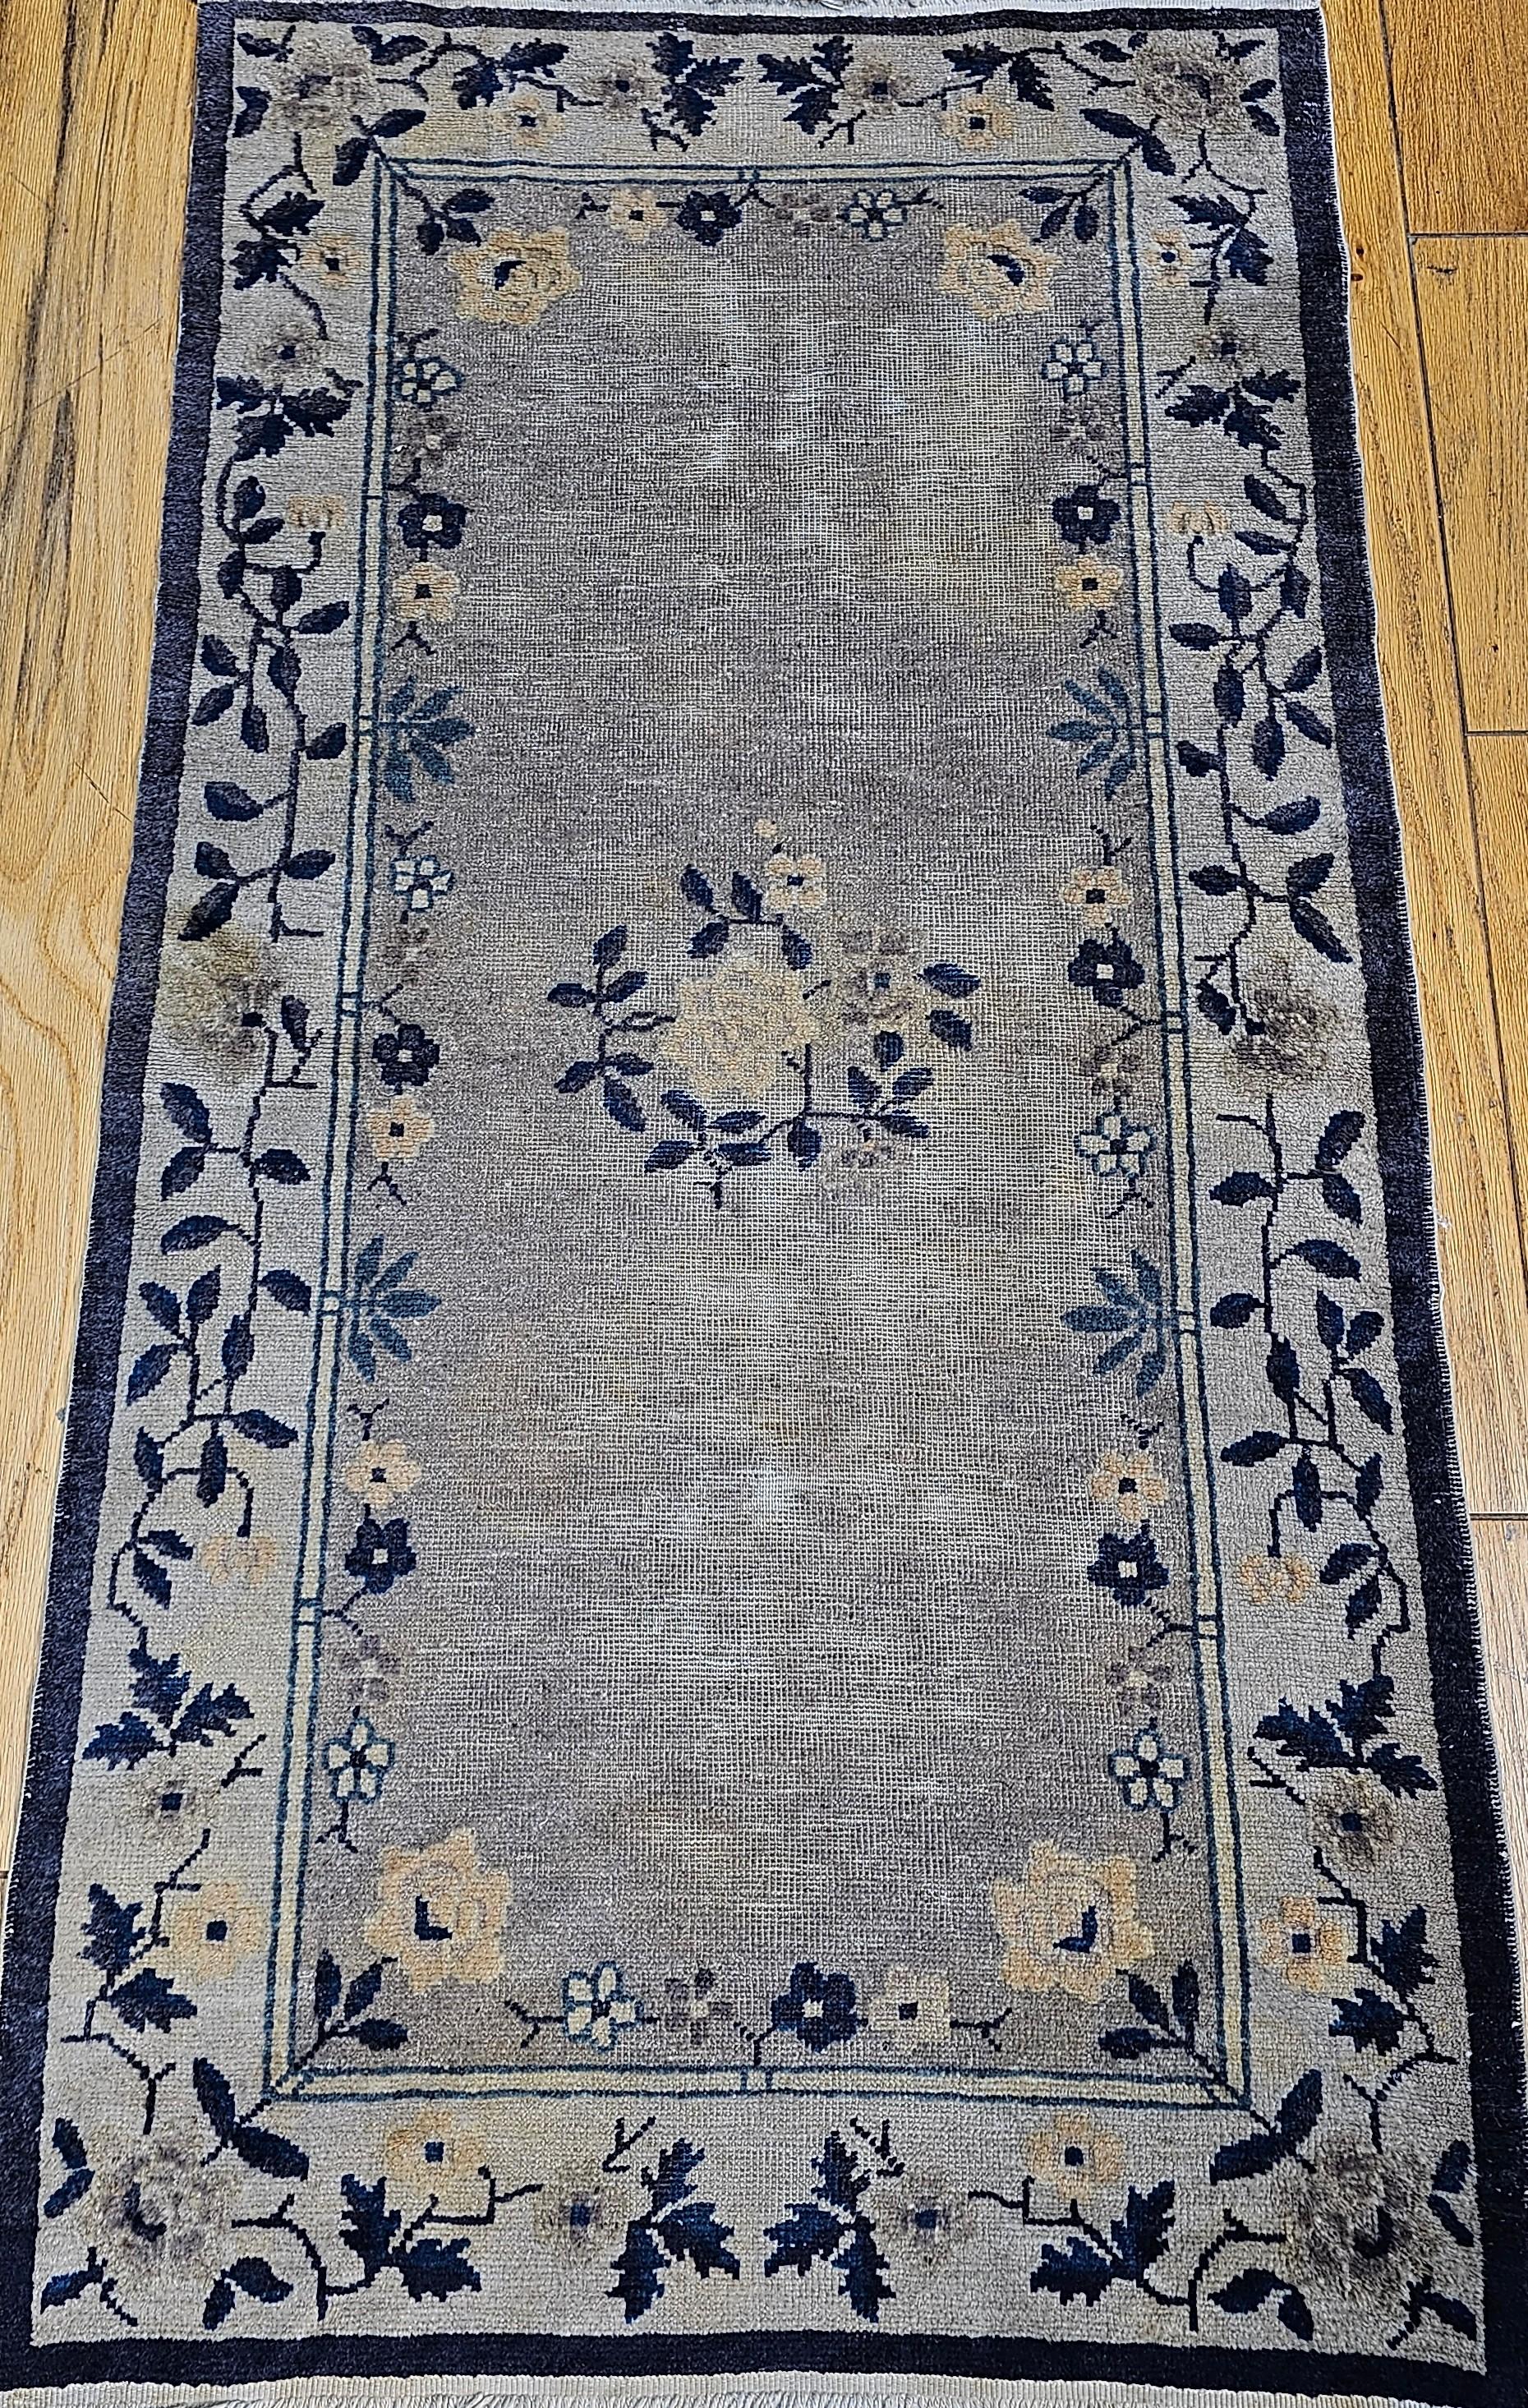 Vintage Art Deco Chinese area rug in earth tone colors and a beautiful floral design in gray, lavender, navy, and tan. The pile in the main field has worn down but the floral designs in the field and border have kept their wool giving a